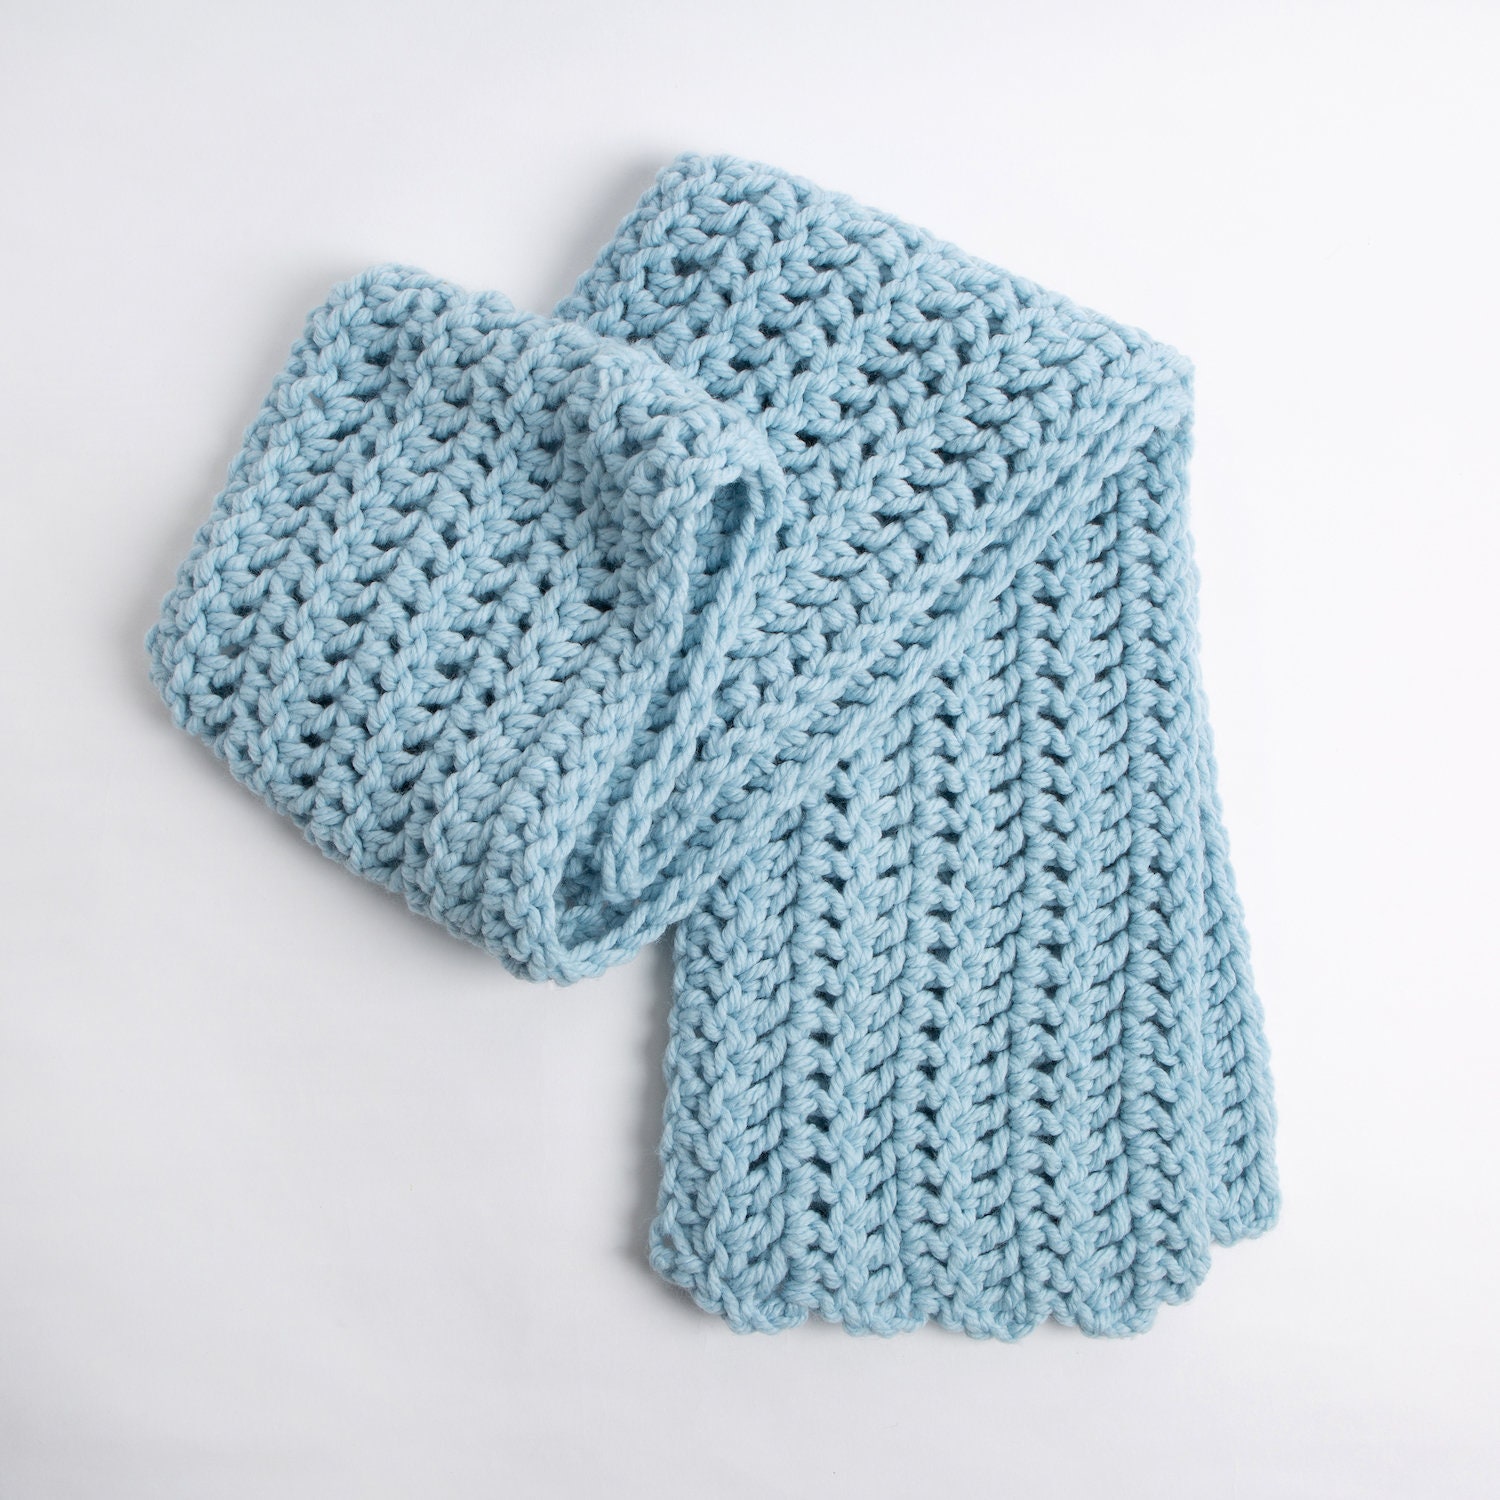 Custom Crochet Scarf Kit By Make Market Sealed Everything You Need To Make  Scarf